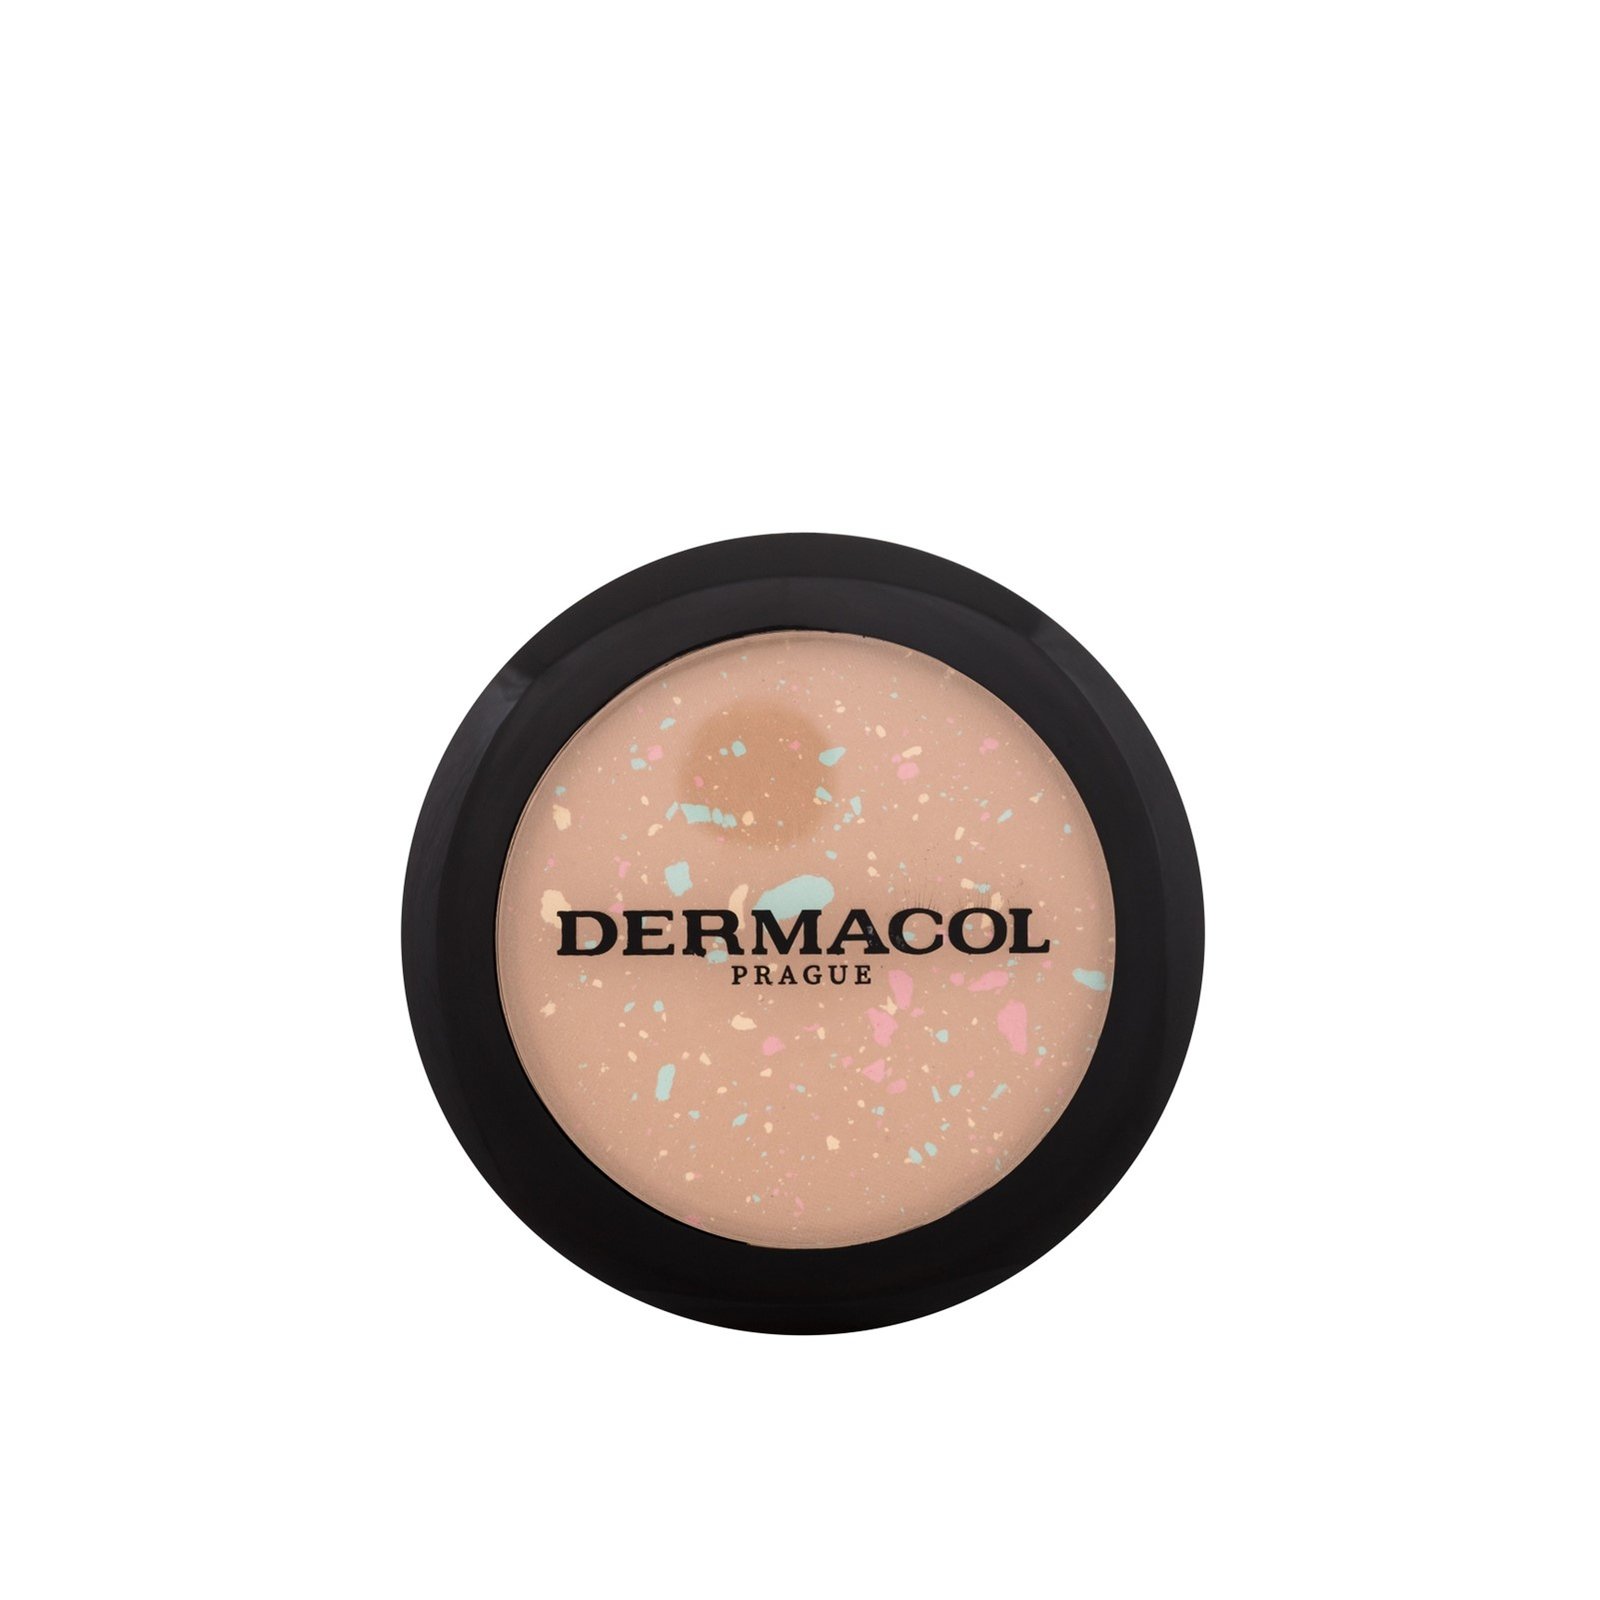 Dermacol Mineral Compact Powder 03 8.5g